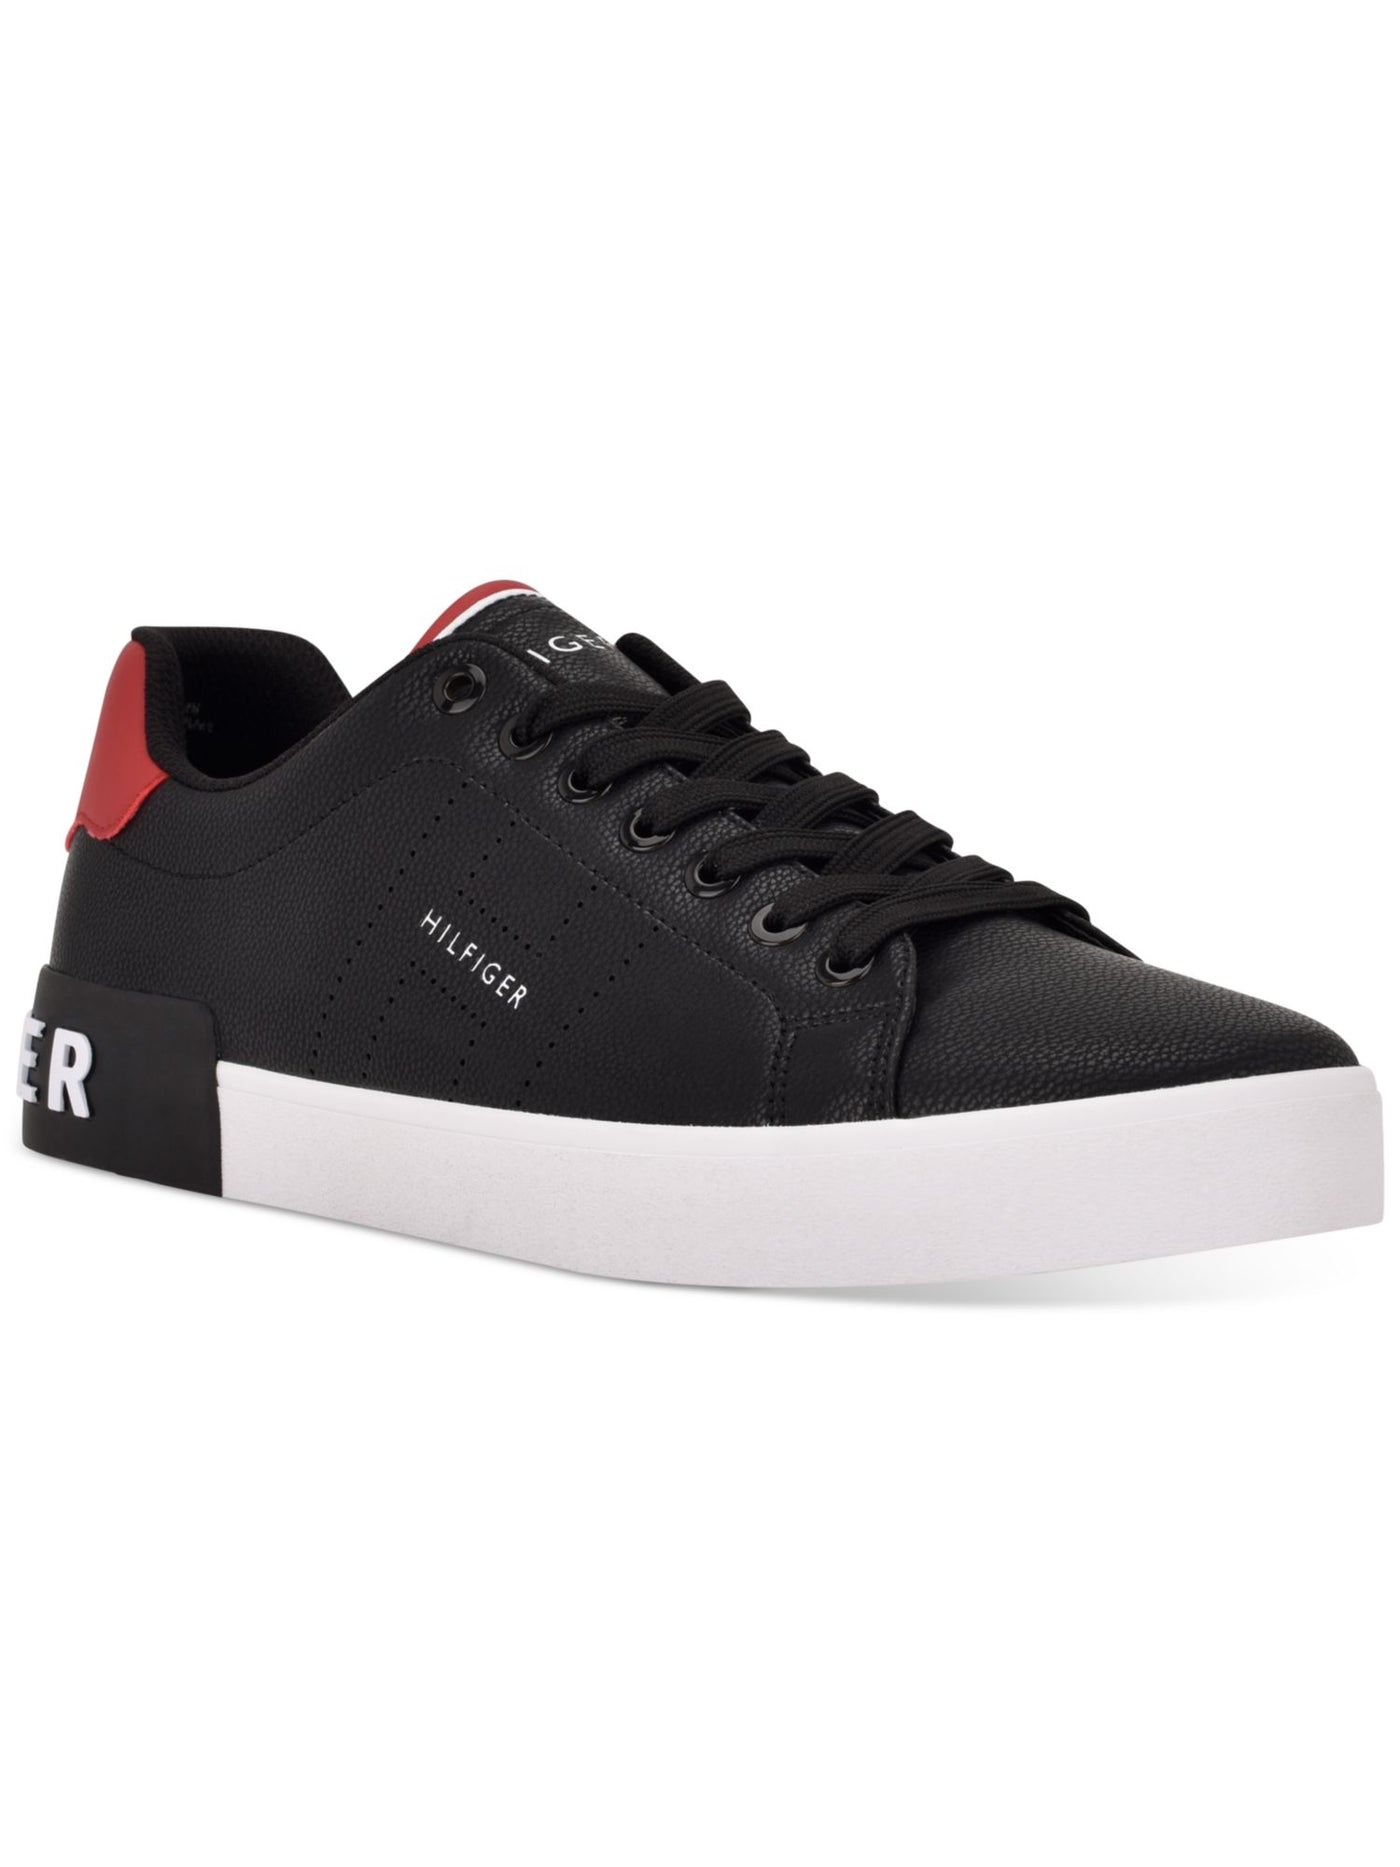 TOMMY HILFIGER Mens Black Paddedcollar Perforated Cushioned Rezmon Round Toe Platform Lace-Up Sneakers Shoes 12